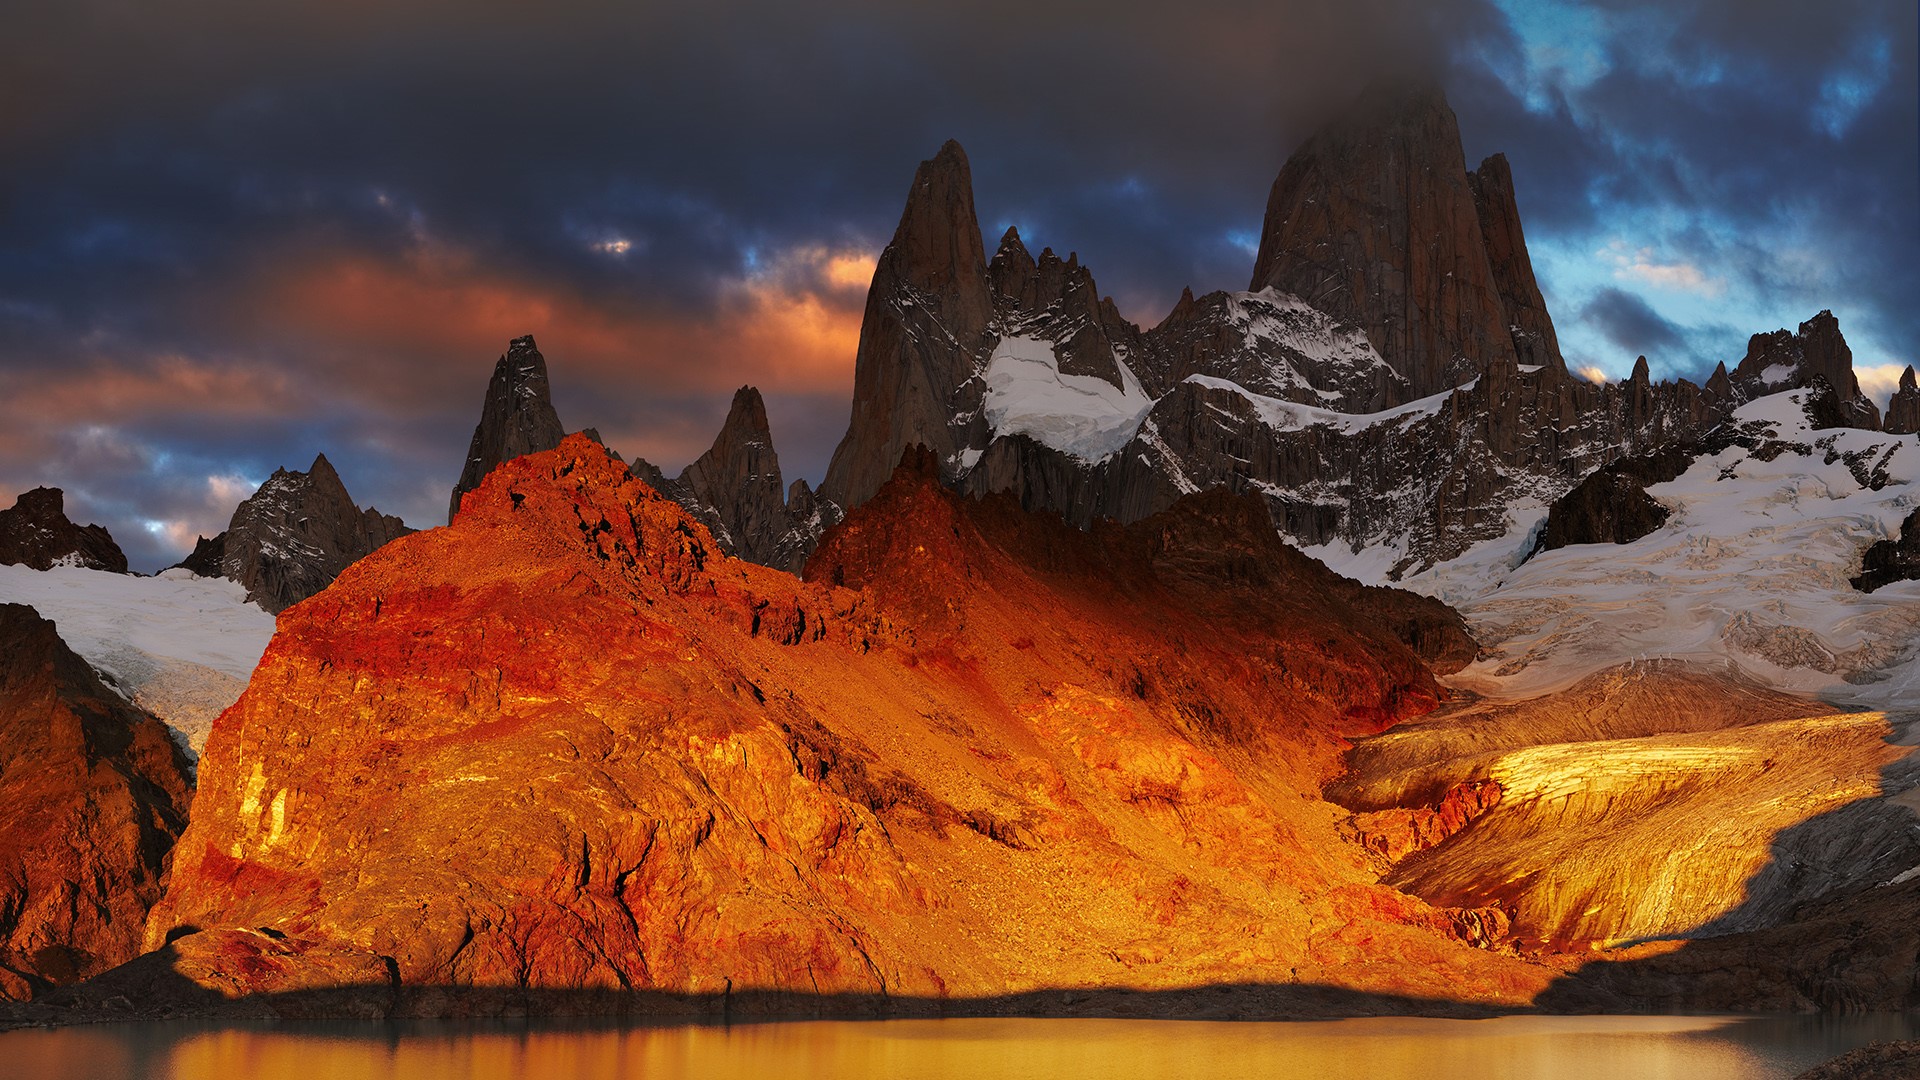 General 1920x1080 nature landscape clouds sky mountains snow water snowy mountain glacier sunlight Monte Fitz Roy Patagonia Argentina